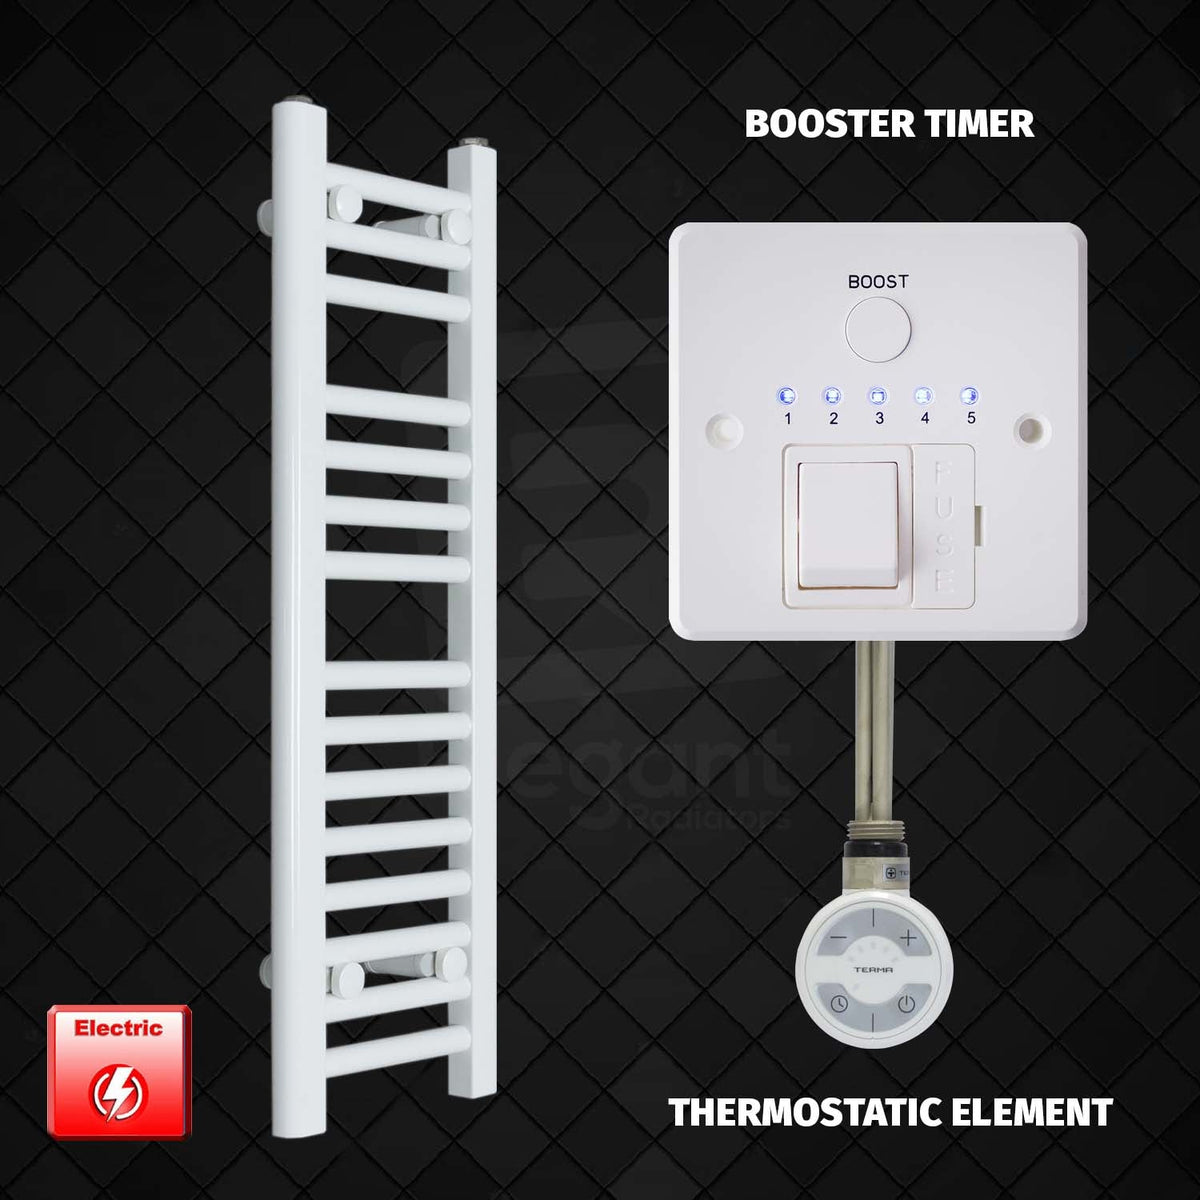 800 mm High 250 mm Wide Pre-Filled Electric Heated Towel Rail Radiator White Booster Timer Thermostatic Element